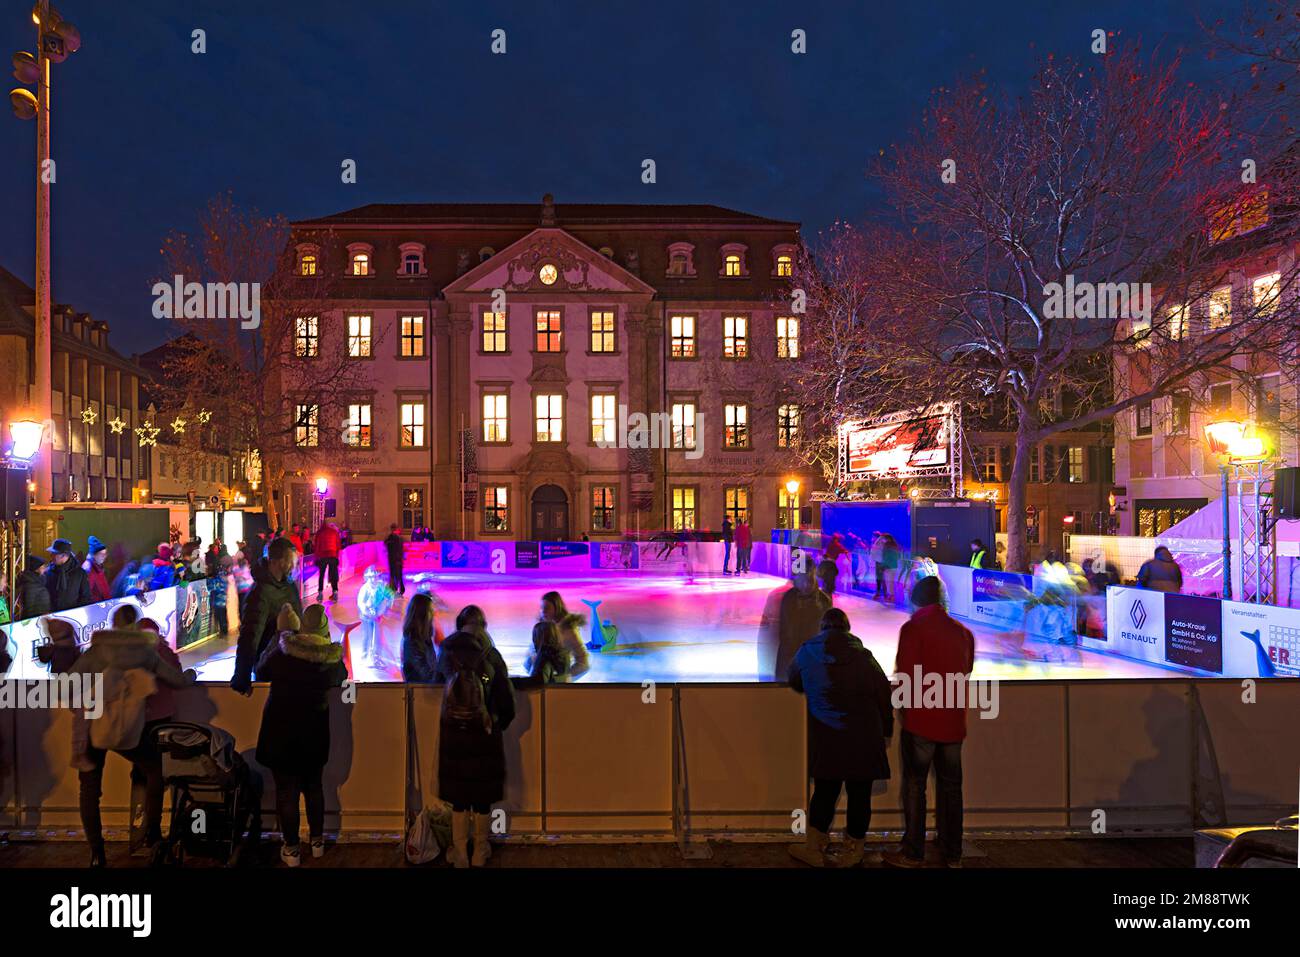 Artificial skating rink in the evening illumination, Erlangen, Middle Franconia, Bavaria, Germany Stock Photo